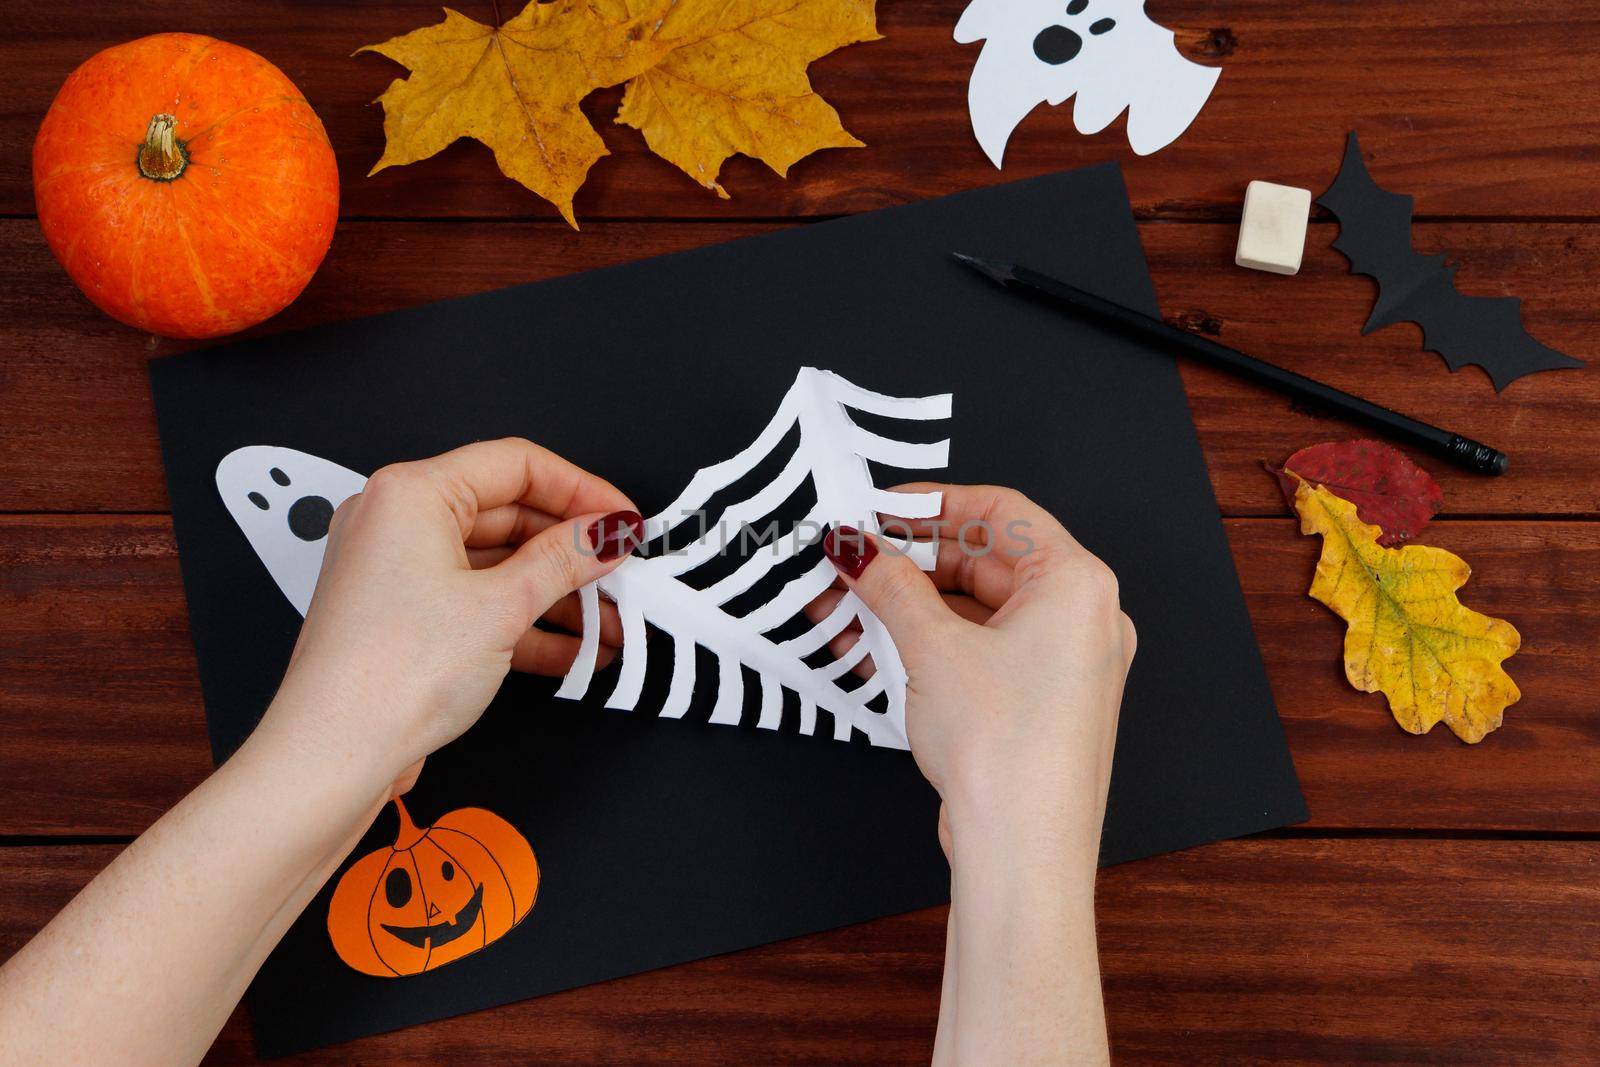 Halloween DIY. Step-by-step instructions for cutting a spider web from paper for the holiday. Step 9.